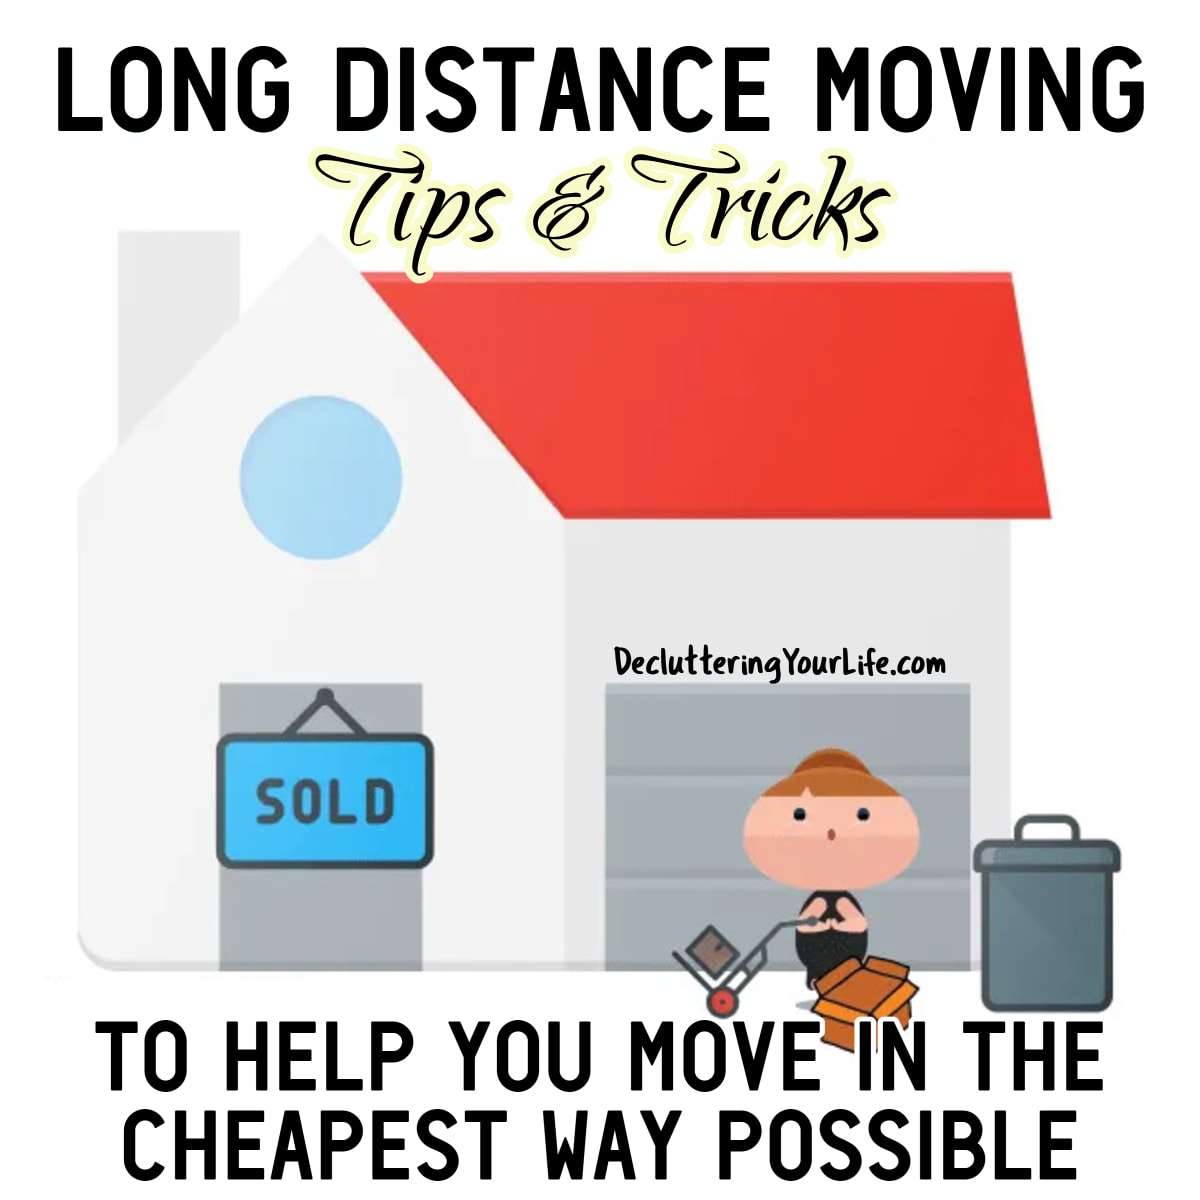 Long distance moving tips & tricks for the cheapest way to move across country